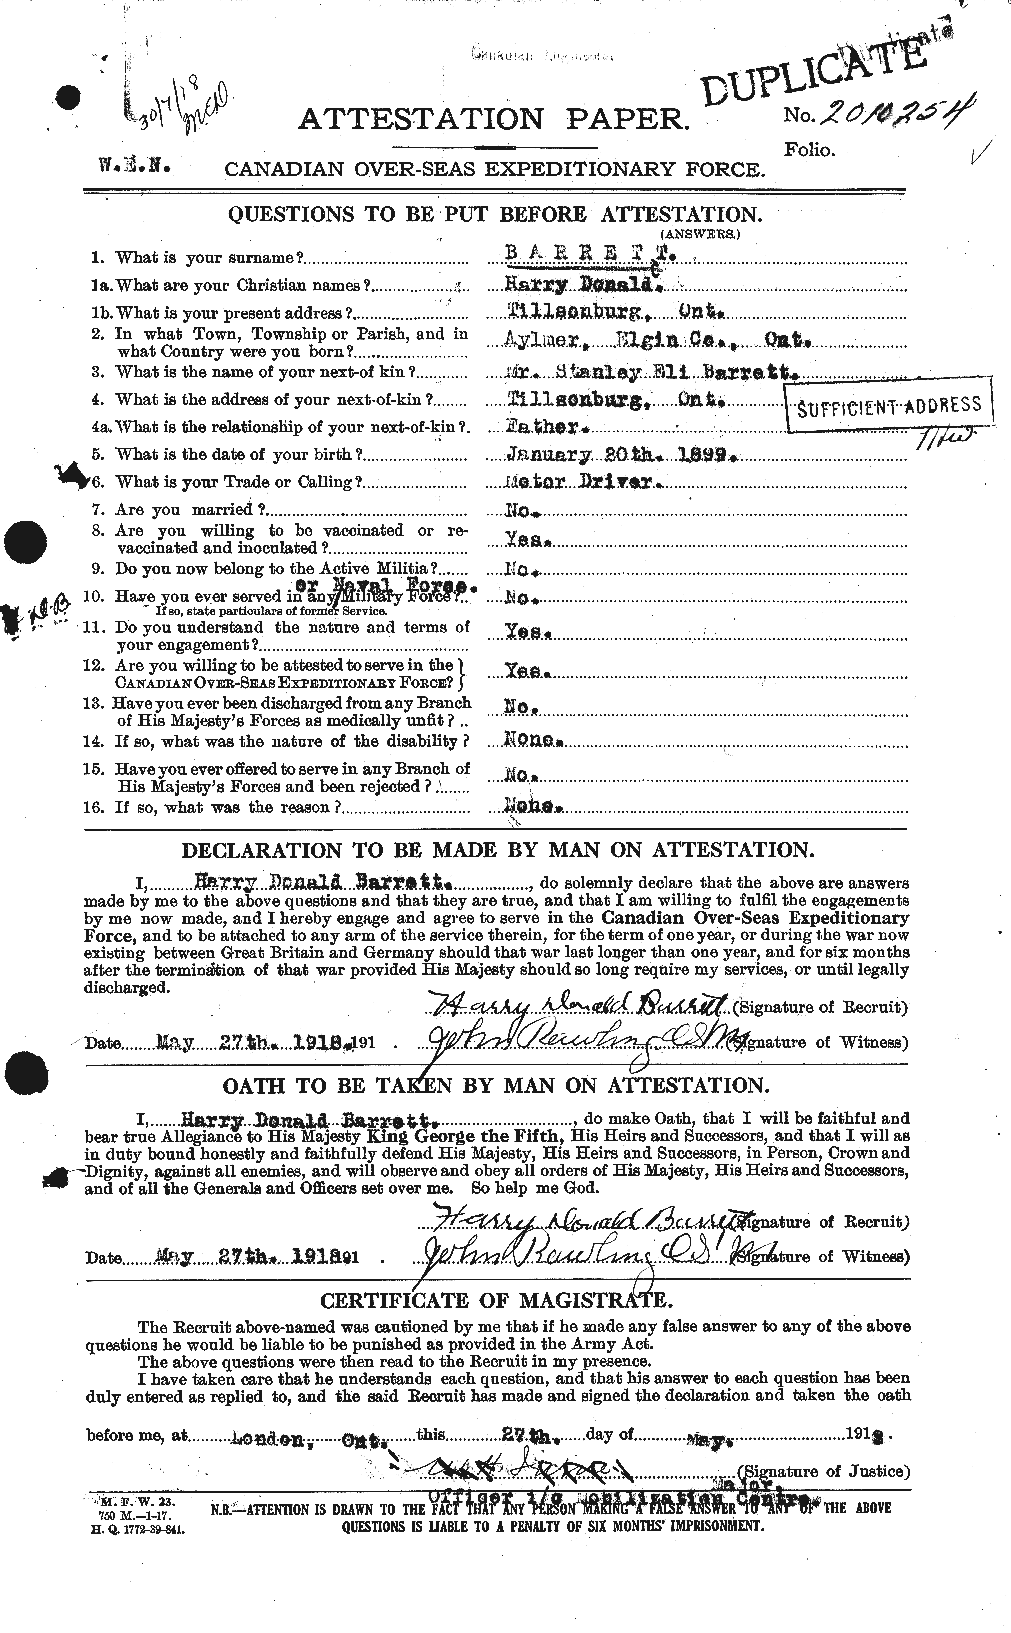 Personnel Records of the First World War - CEF 220291a